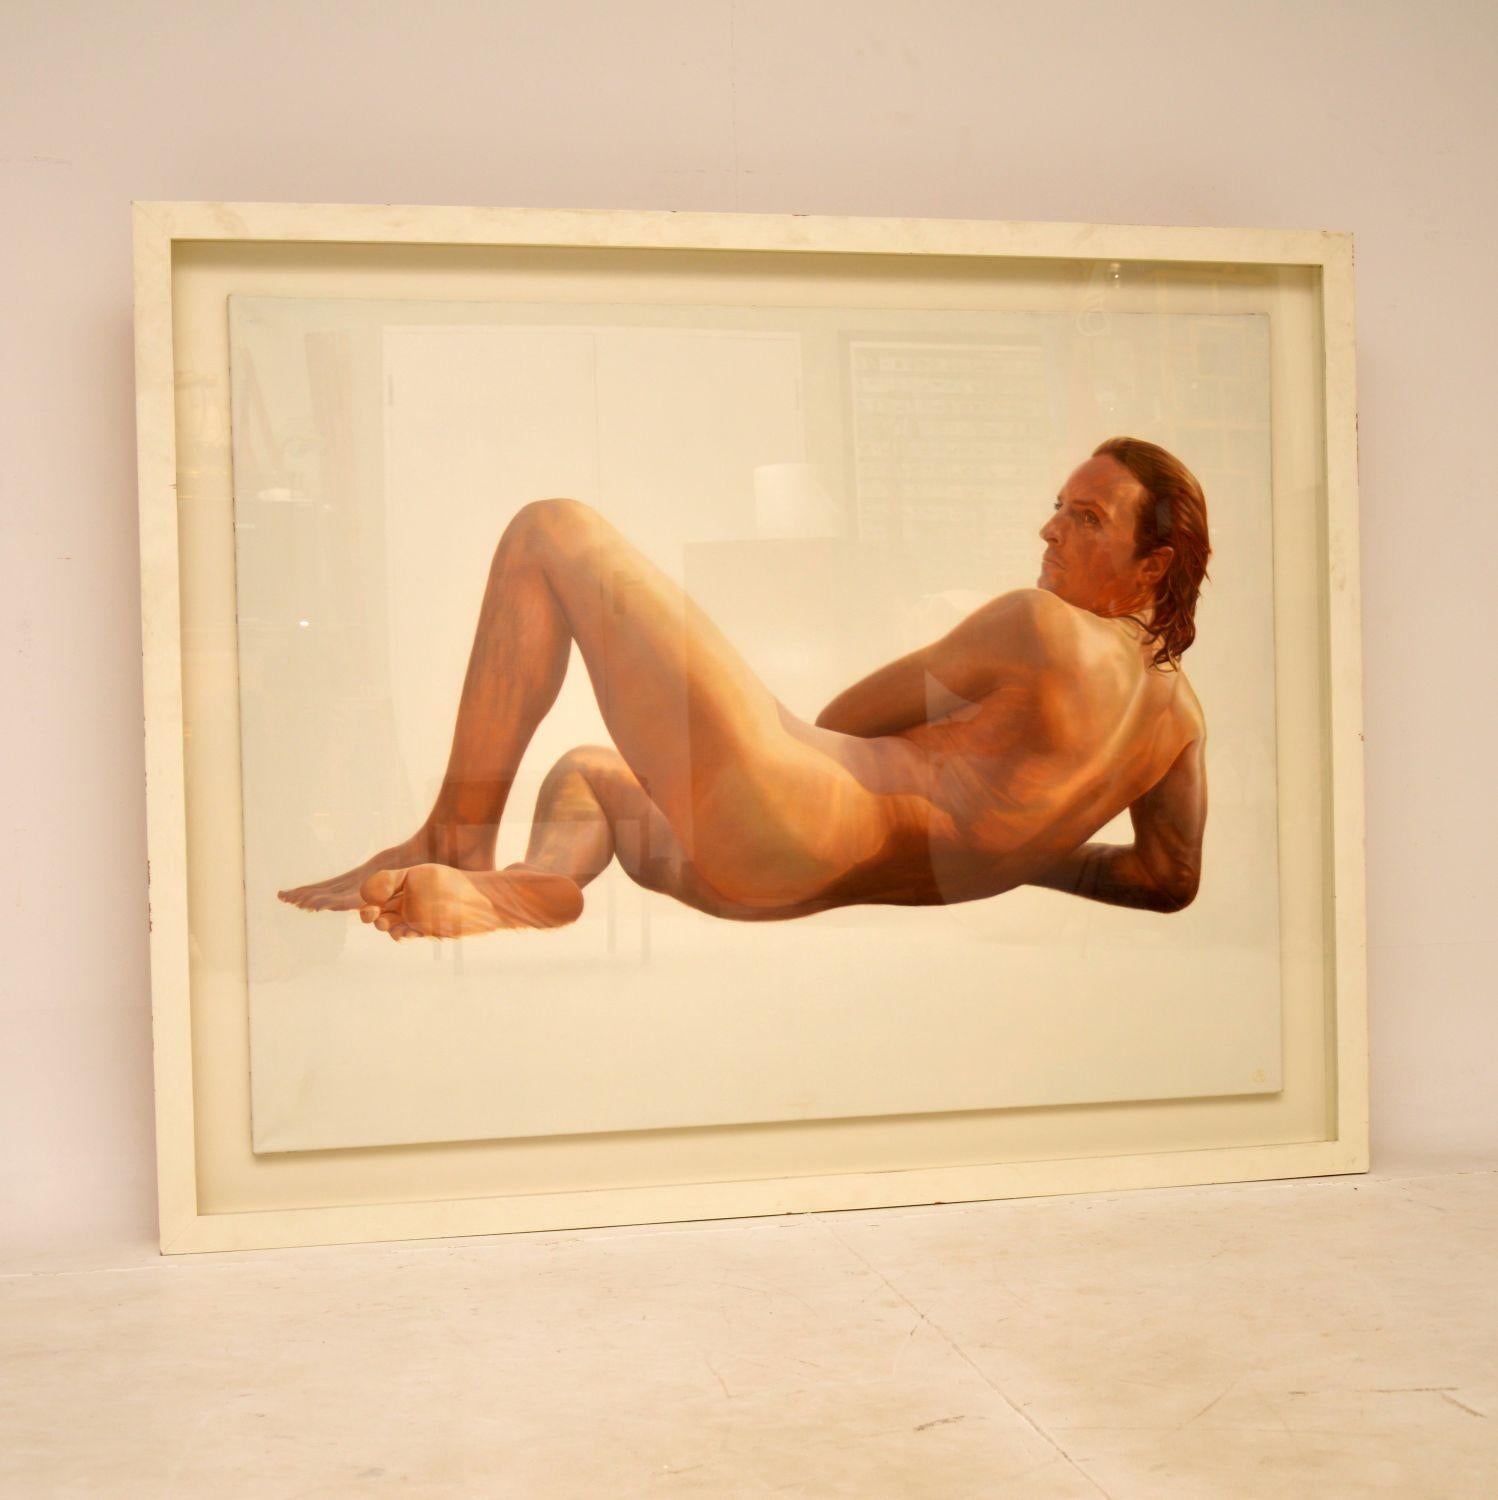 A large and impressive oil painting of a male nude, by acclaimed British artist Alan Brassington. This dates from the late 20th century.

Alan Brassington specialises in portraits and painting horses, he is currently the artist in residence Royal